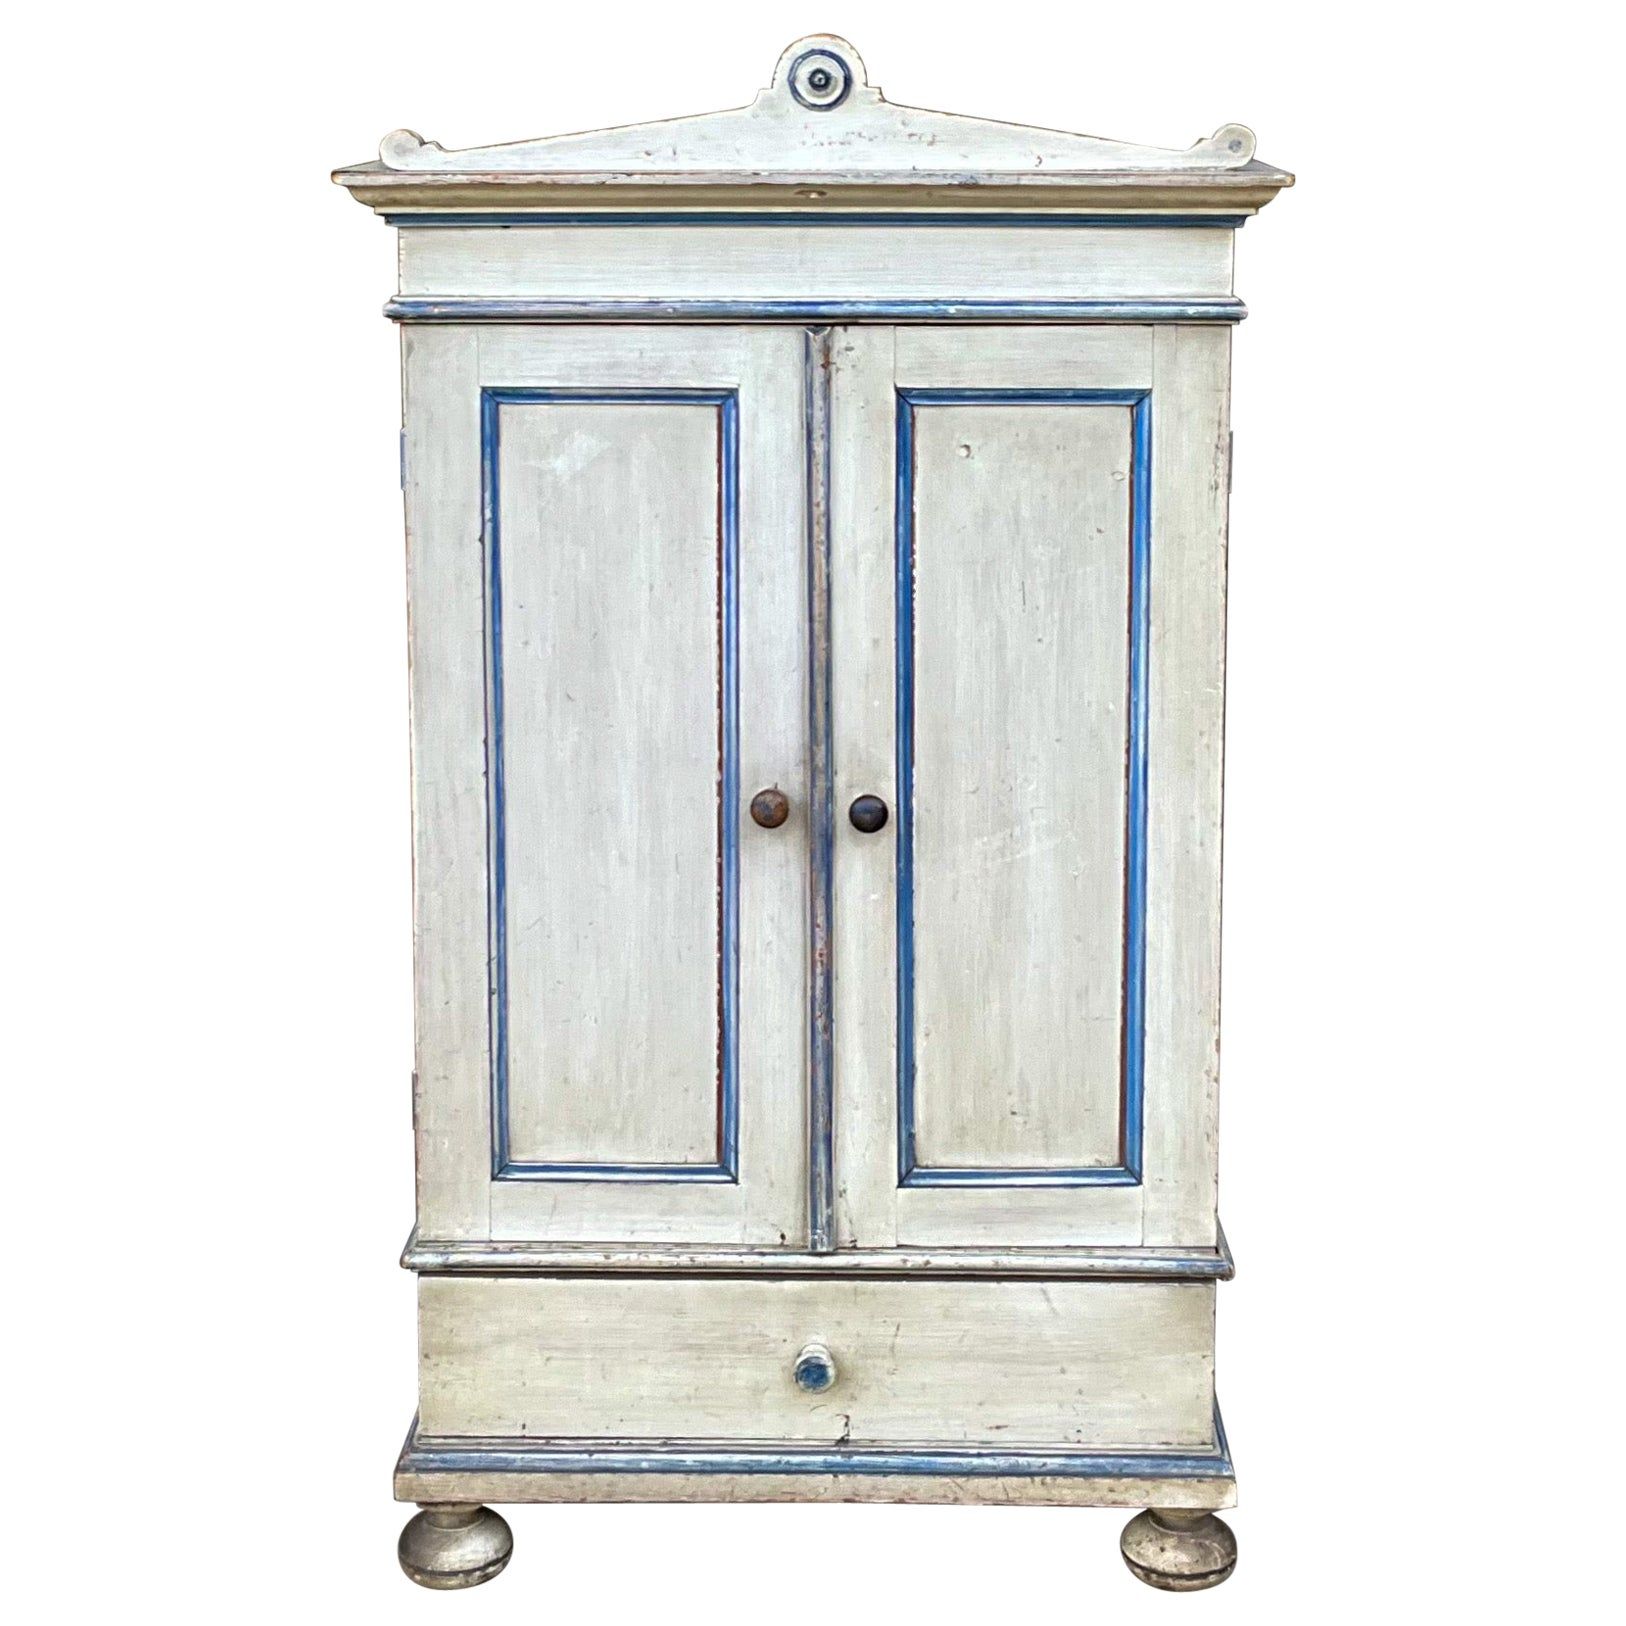 Antique And Vintage Wardrobes And Armoires – 2,374 For Sale At 1stdibs | Antique  Armoire, Antique Wardrobe Armoires, Antique French Armoire In Cheap Vintage Wardrobes (View 13 of 15)